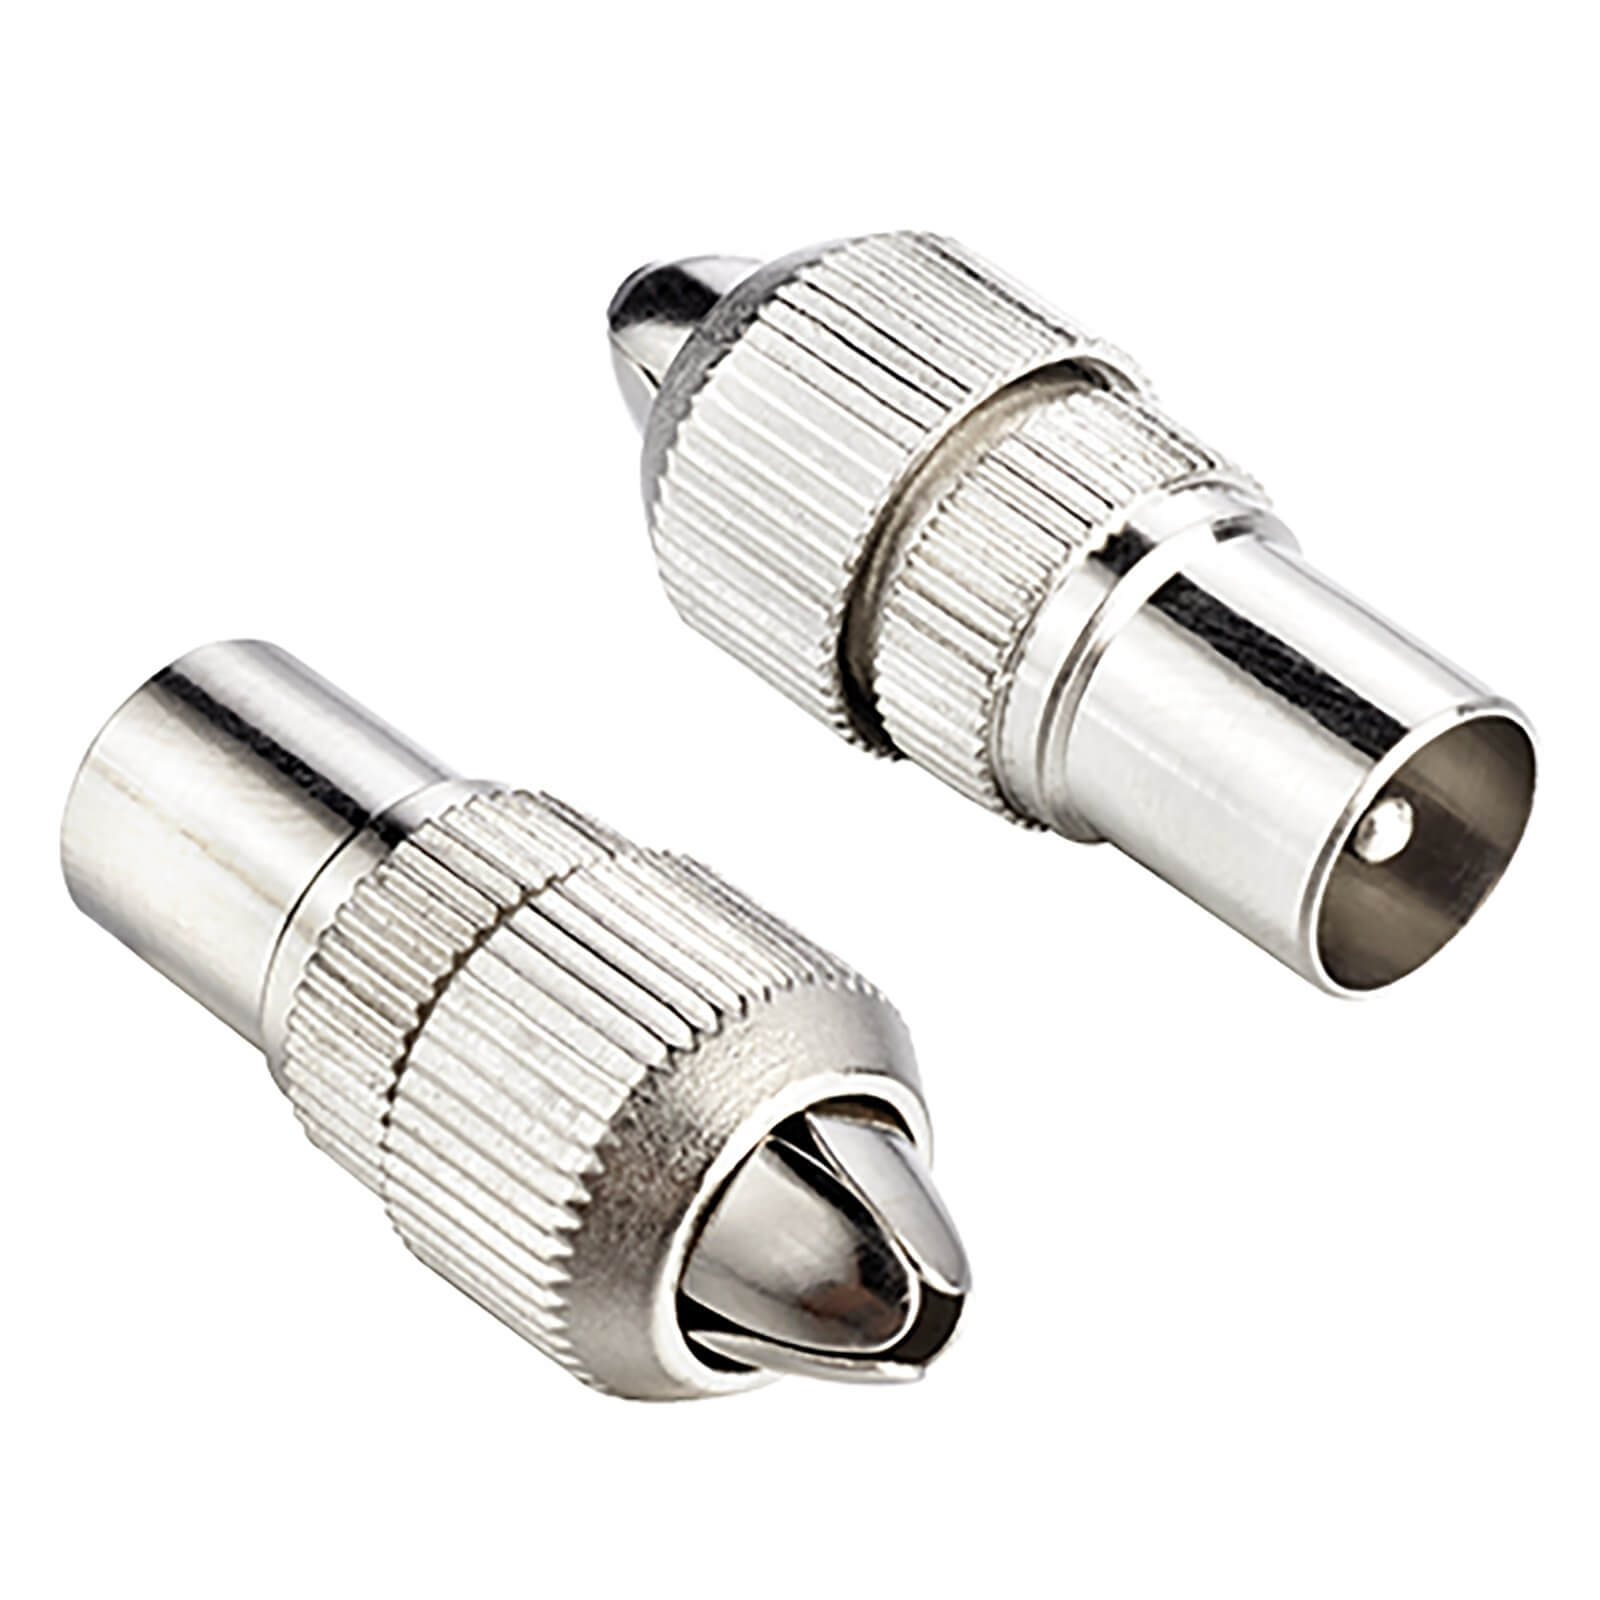 Ross Coaxial Aerial Cable Plugs Nickel 2 Pack